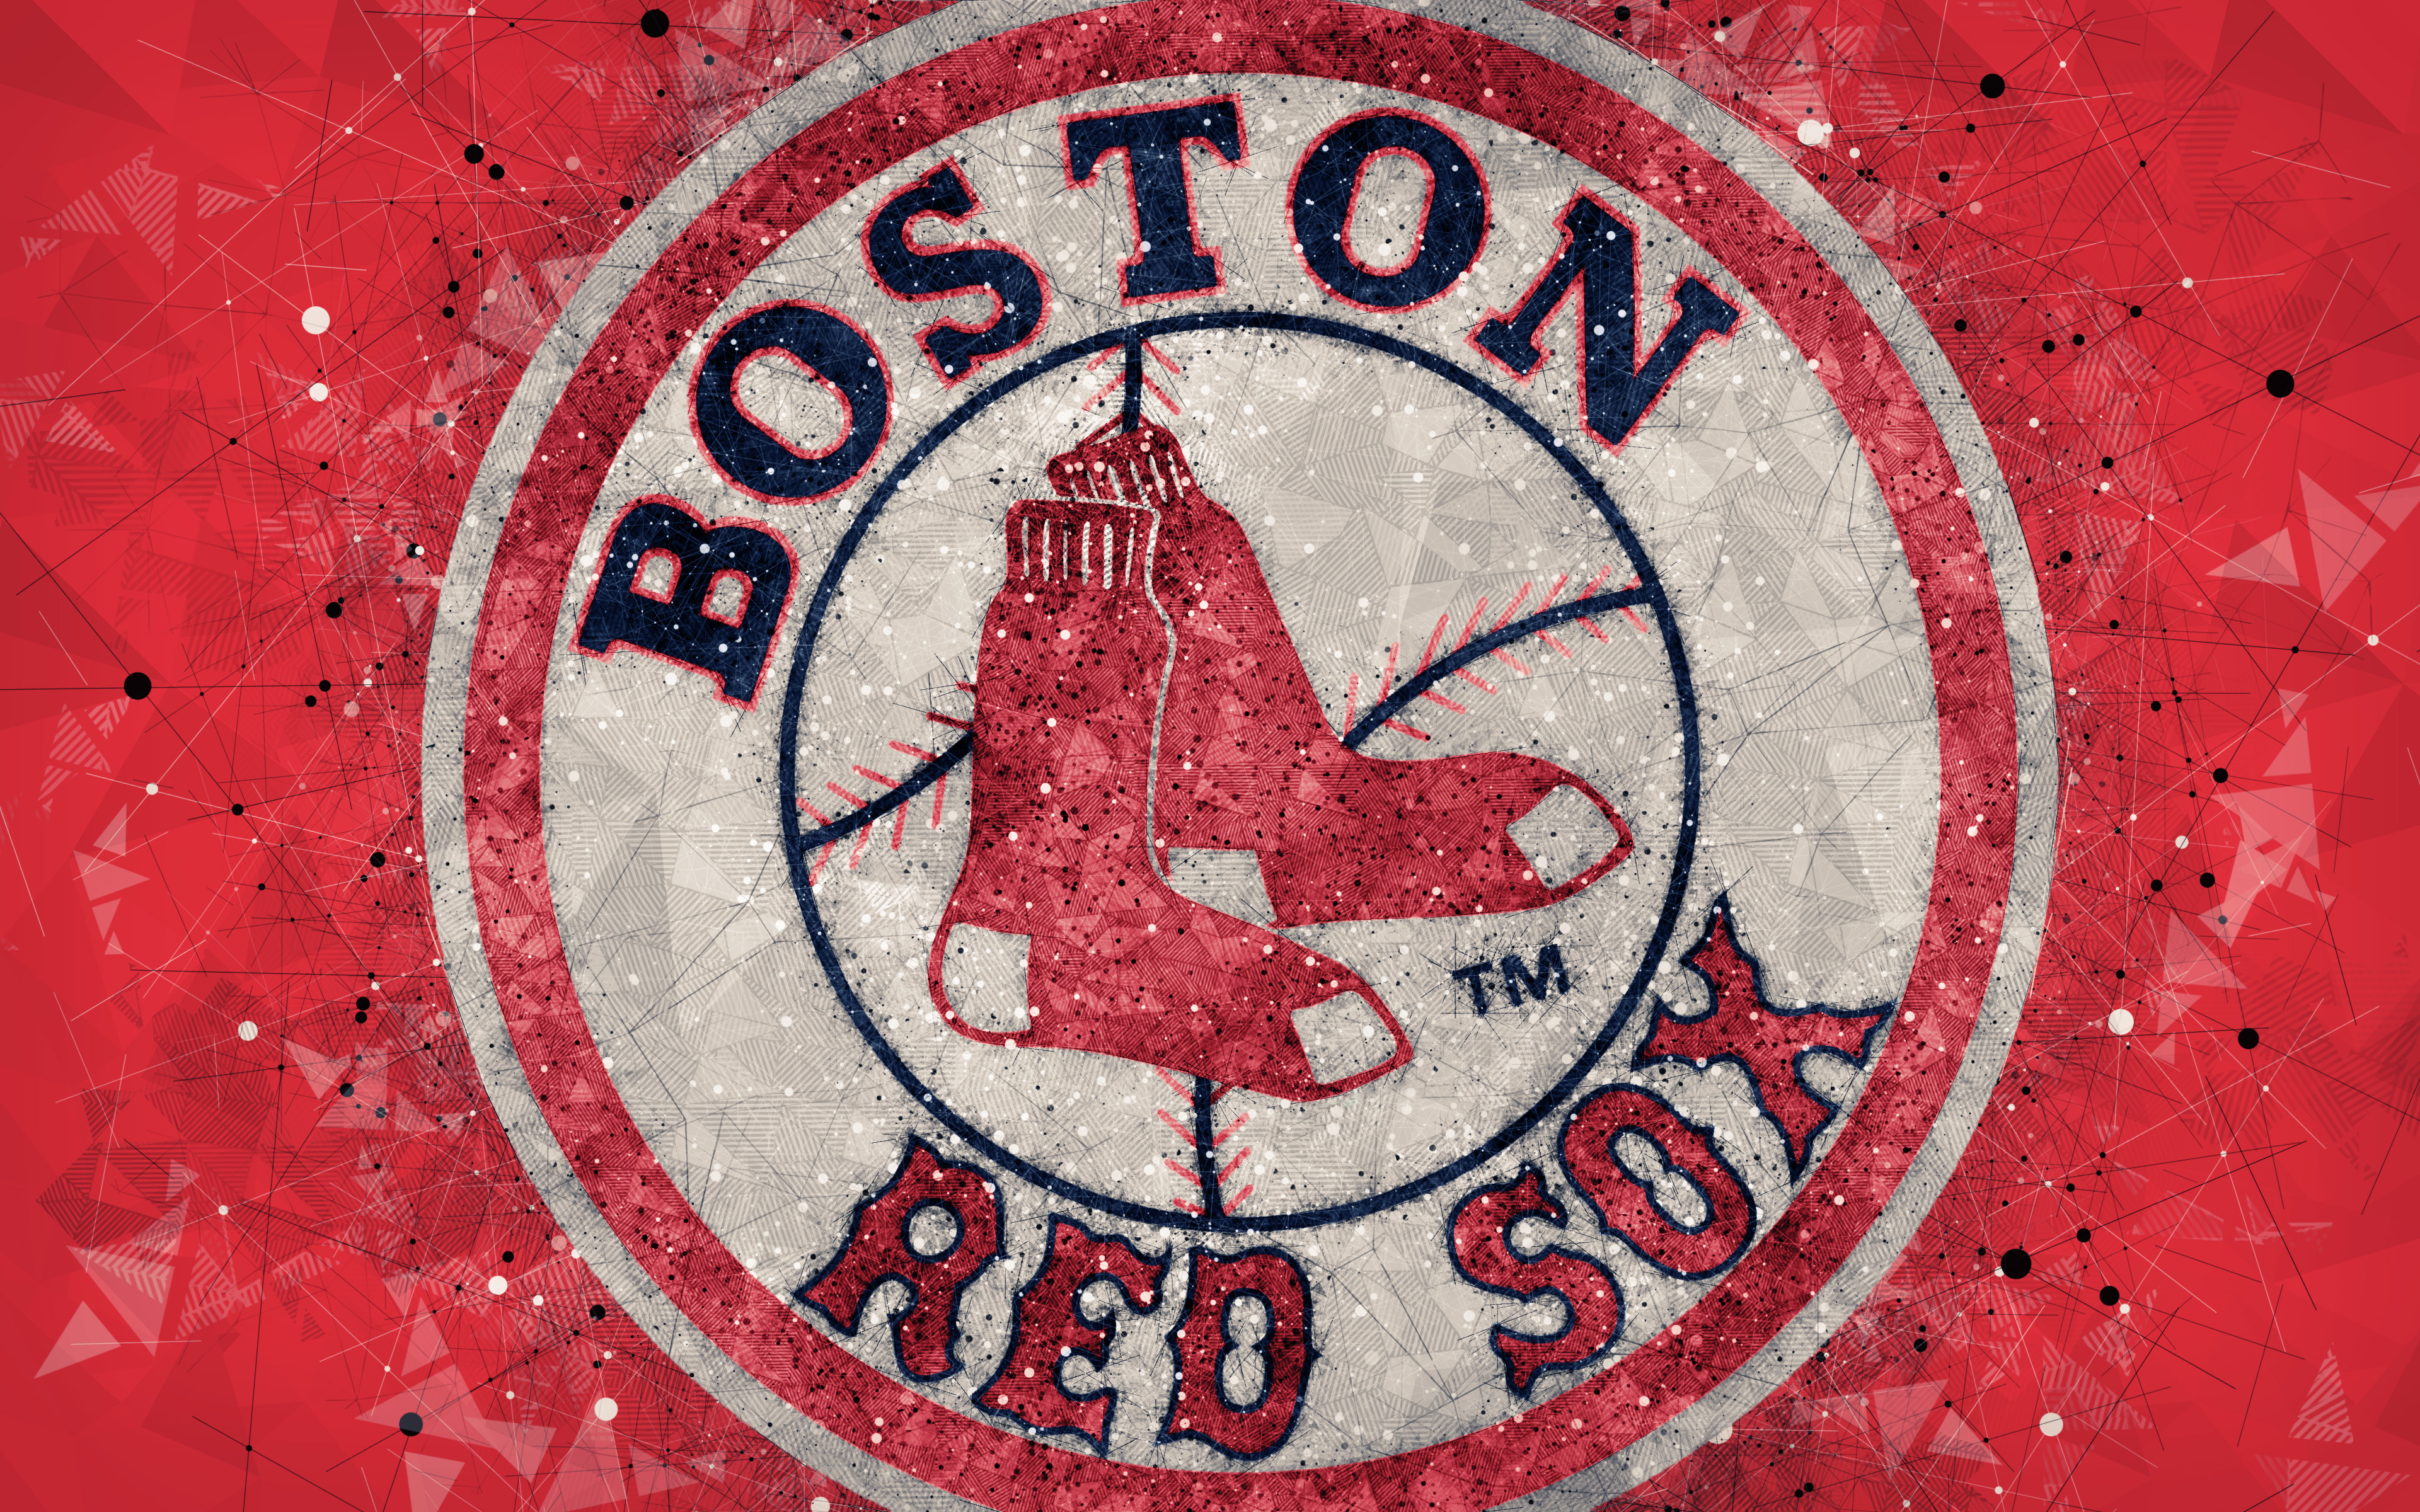 Red Sox 2021 Wallpapers - Wallpaper Cave.